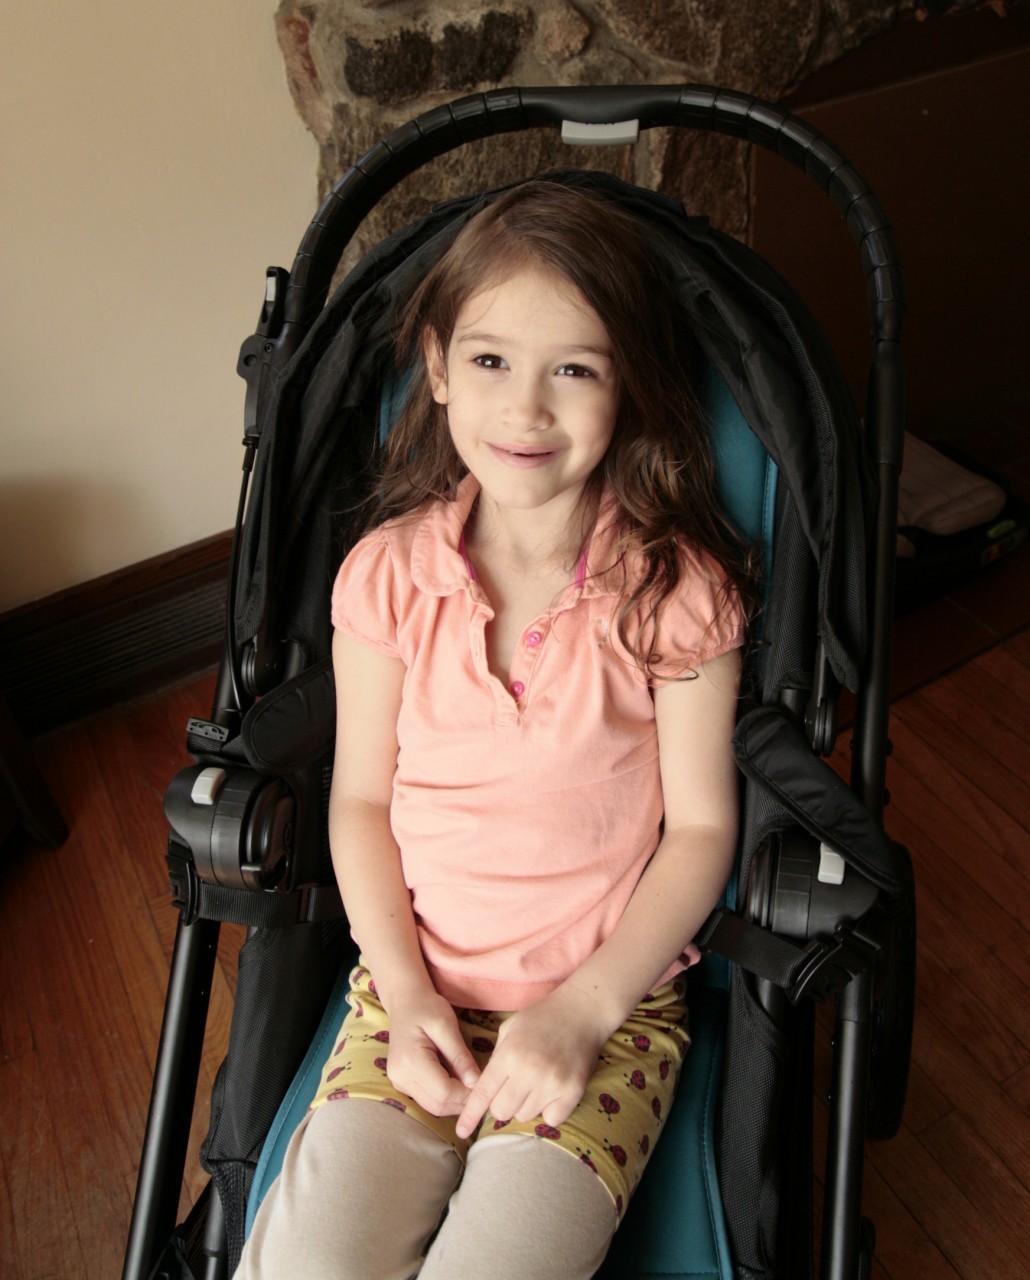 6 years old stroller